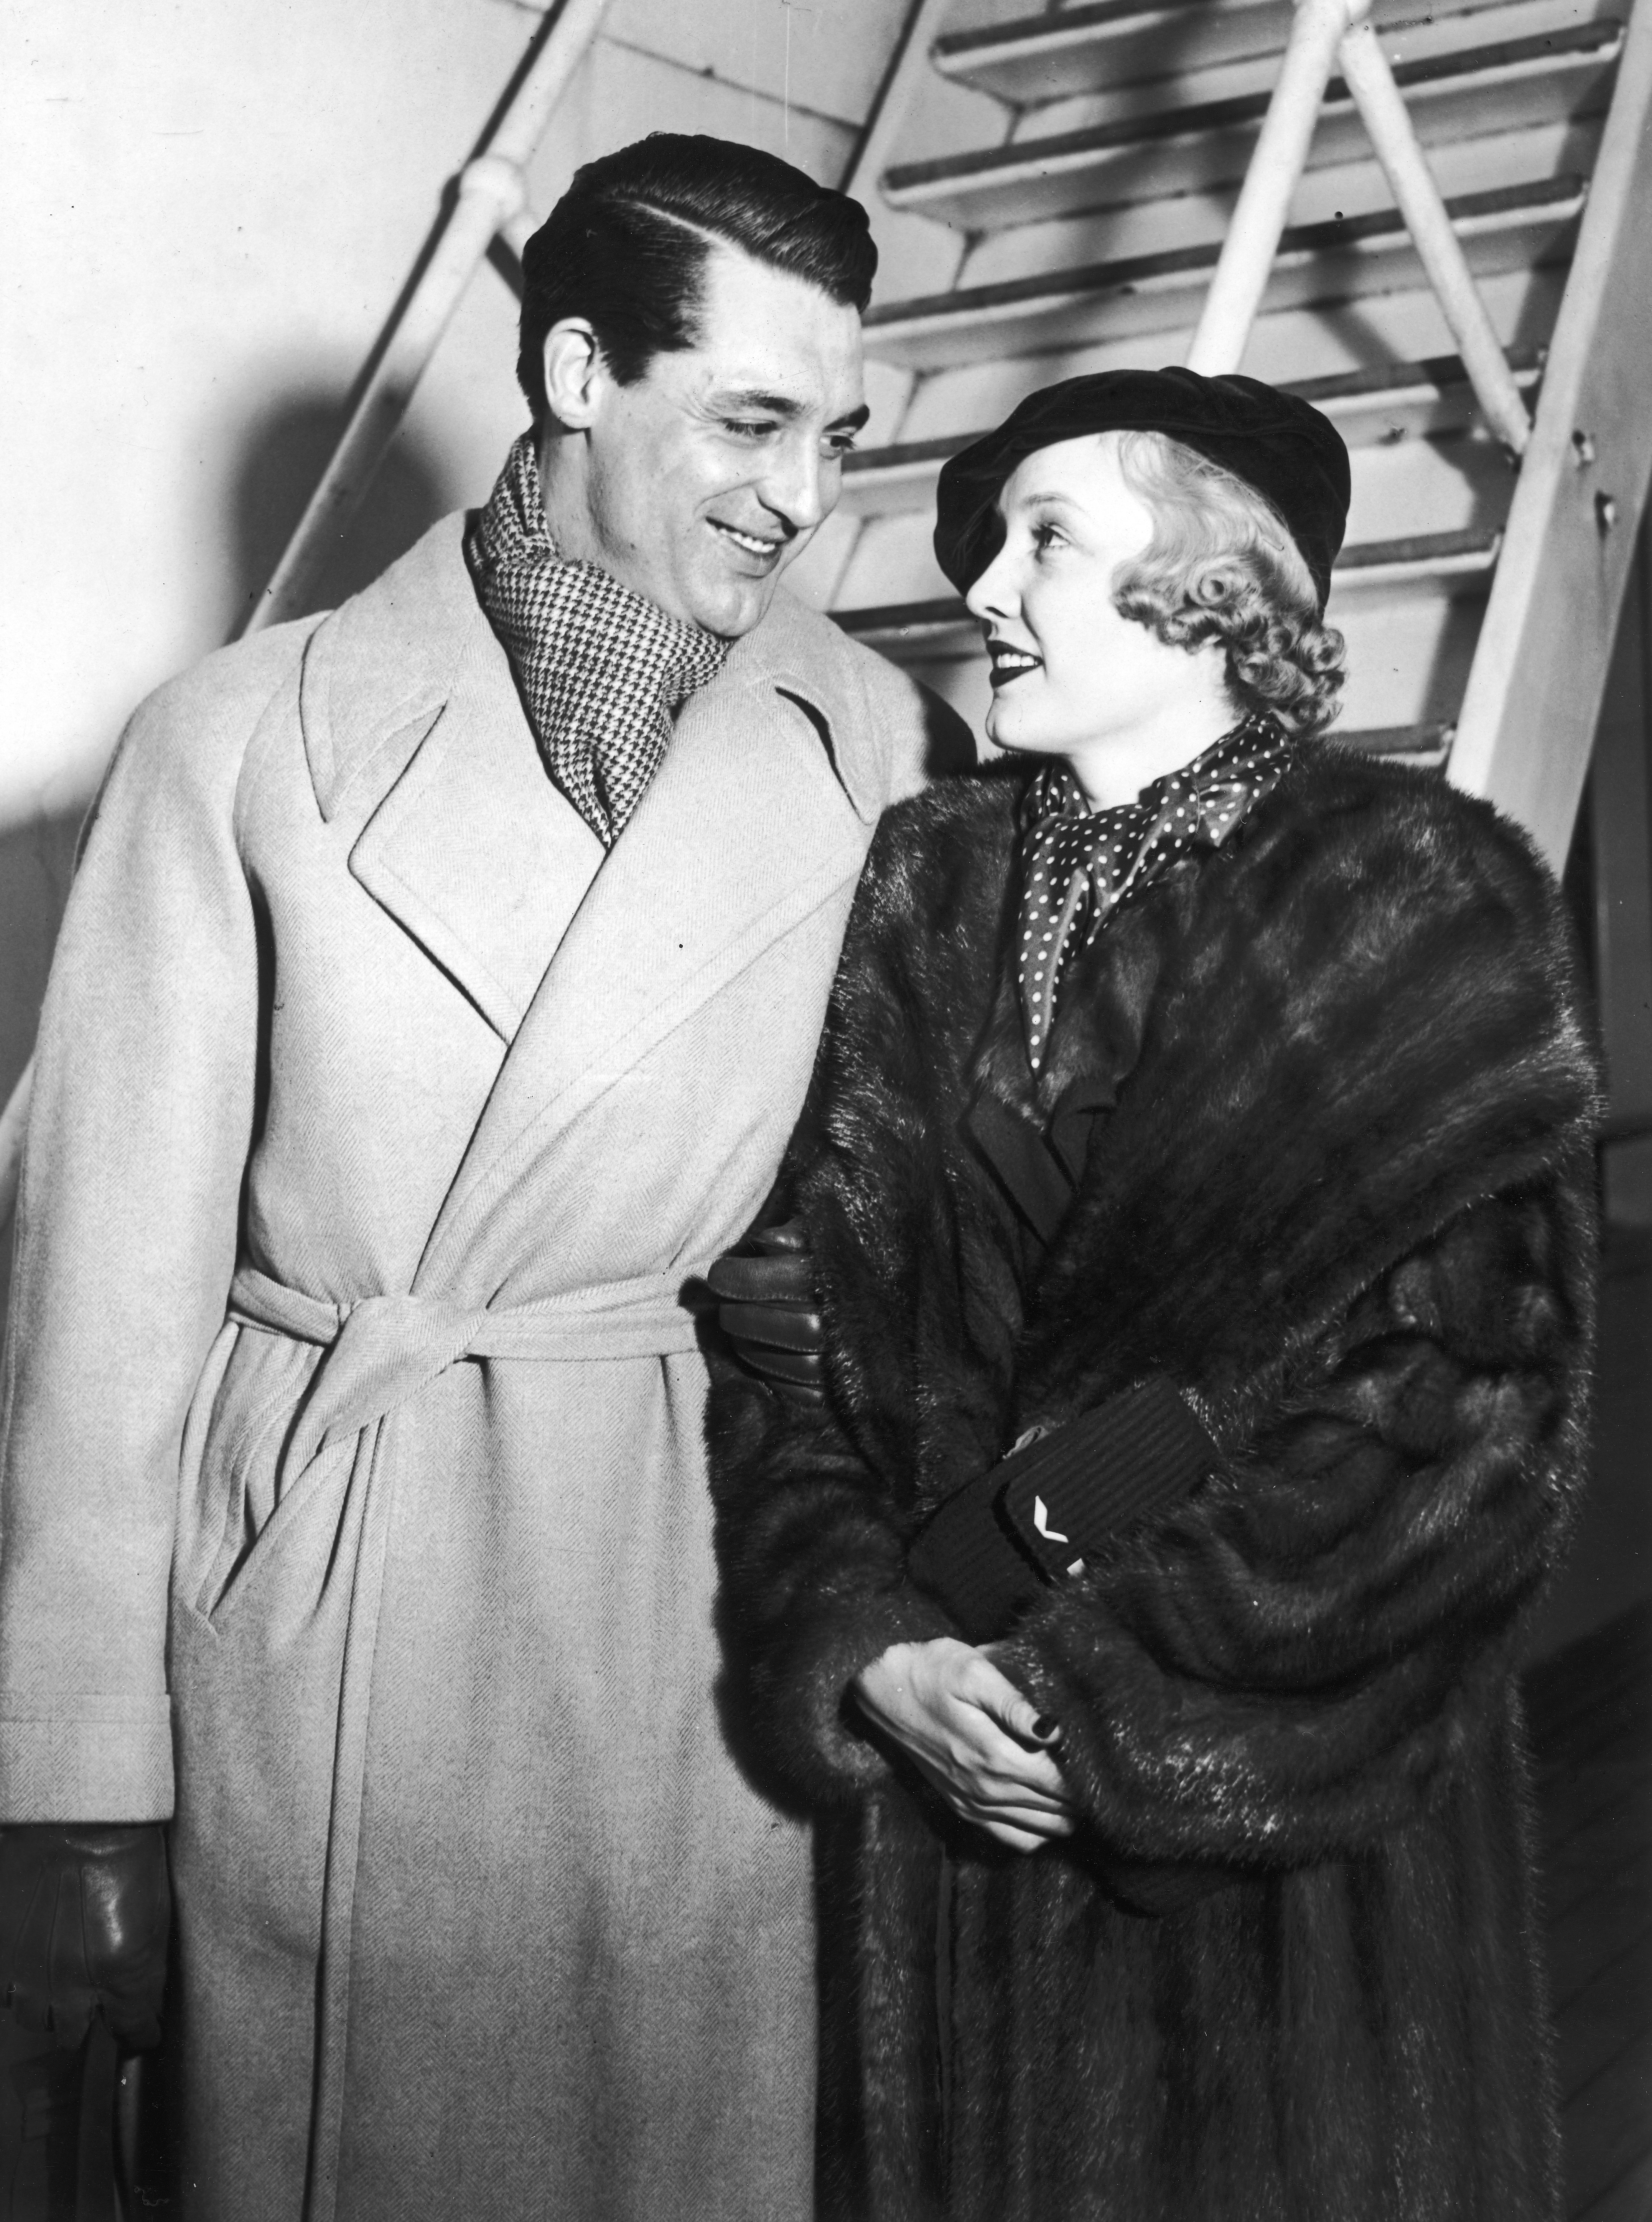 British-American actor Cary Grant (1904 - 1986) with his first wife, actress Virginia Cherrill (1908 - 1996), circa 1934 | Source: Getty Images